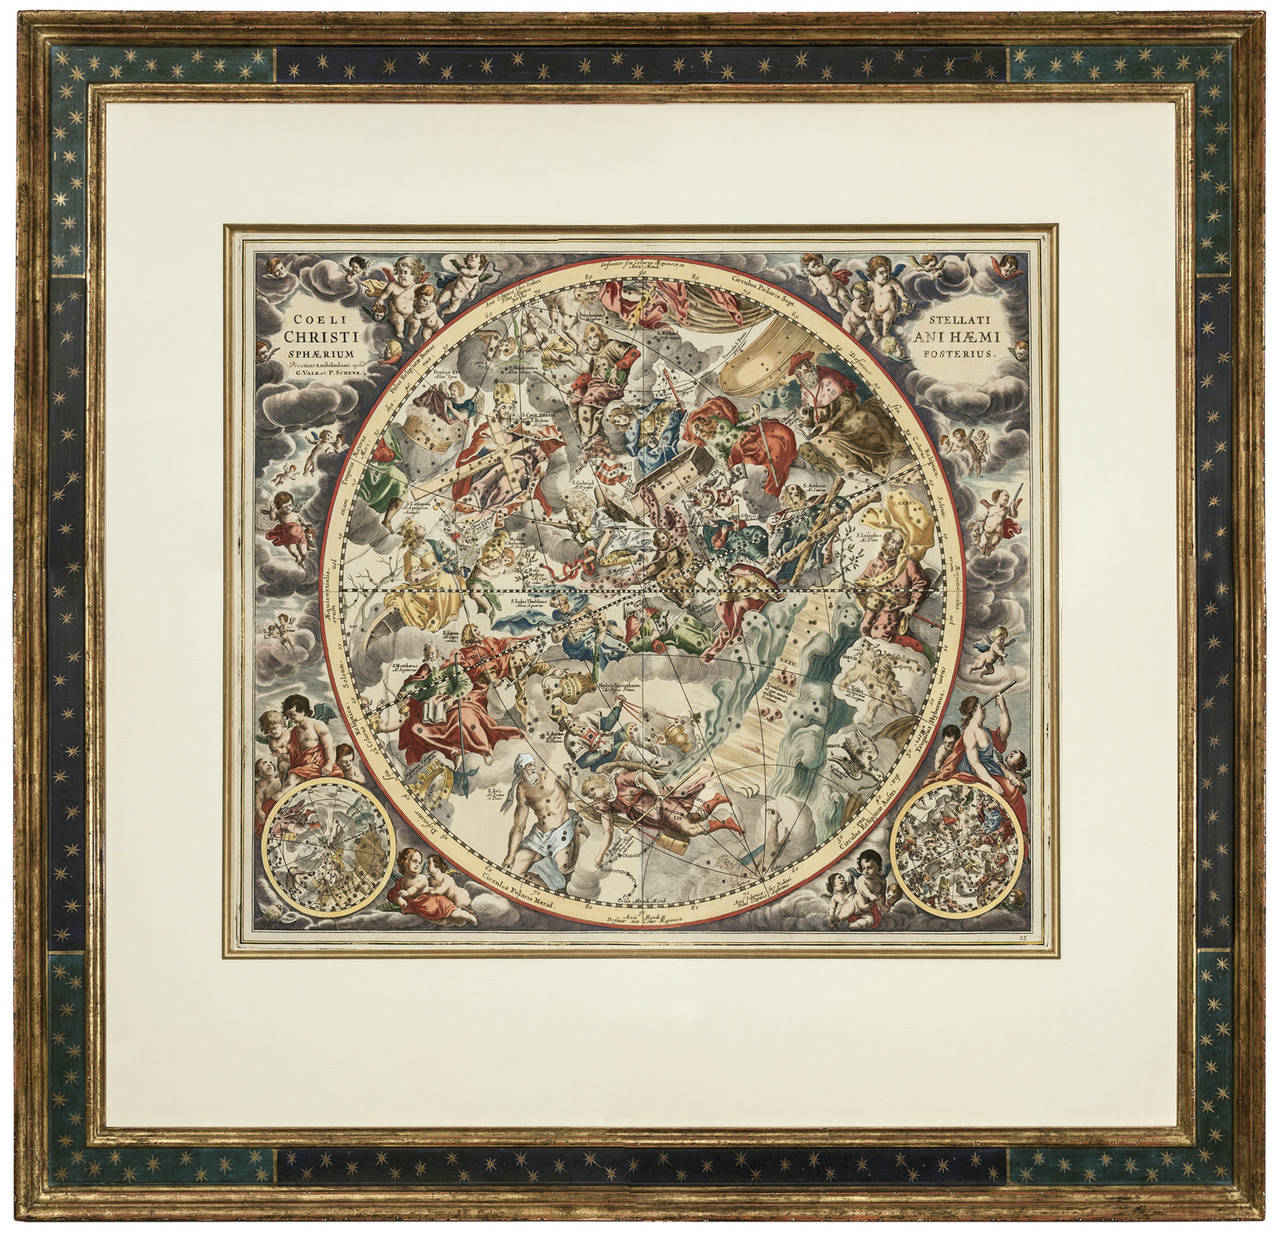 From Harmonica Microcosmic, a Valk & Schenk, Amsterdam.

Andreas Cellarius was a Dutch-German cartographer best known for his Harmonia Macrocosmica, a major star atlas published in 1660 by the Amsterdam publisher Johannes Janssonius as a